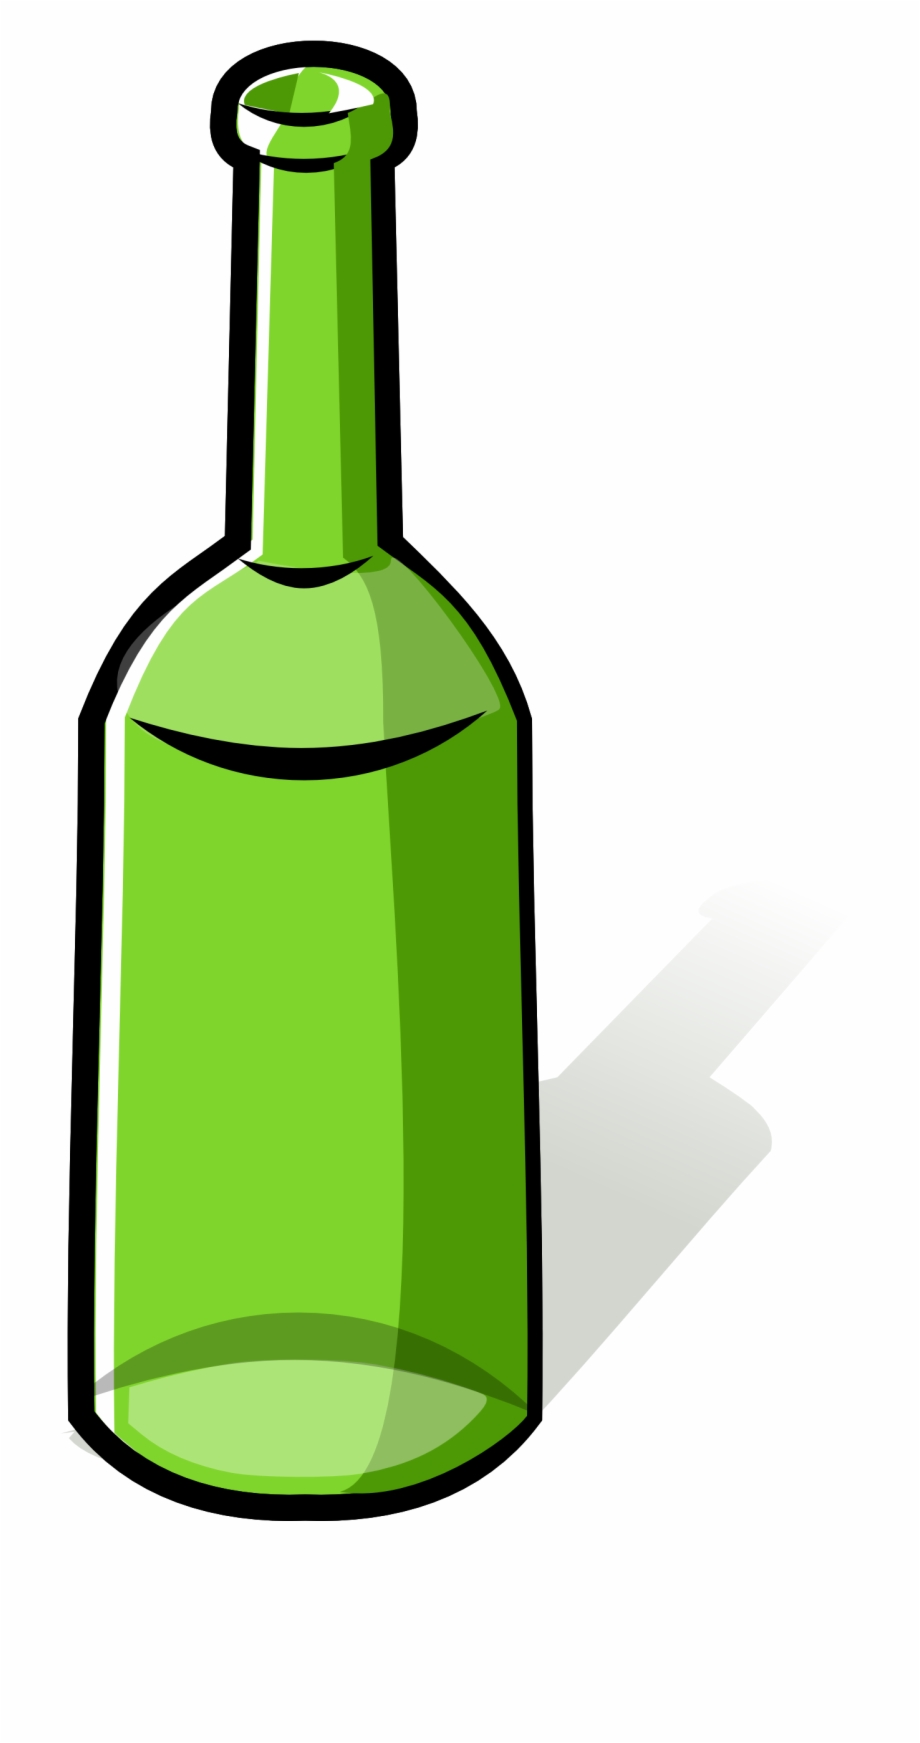 Grapes Clipart Wine Glass Green Bottle Clipart